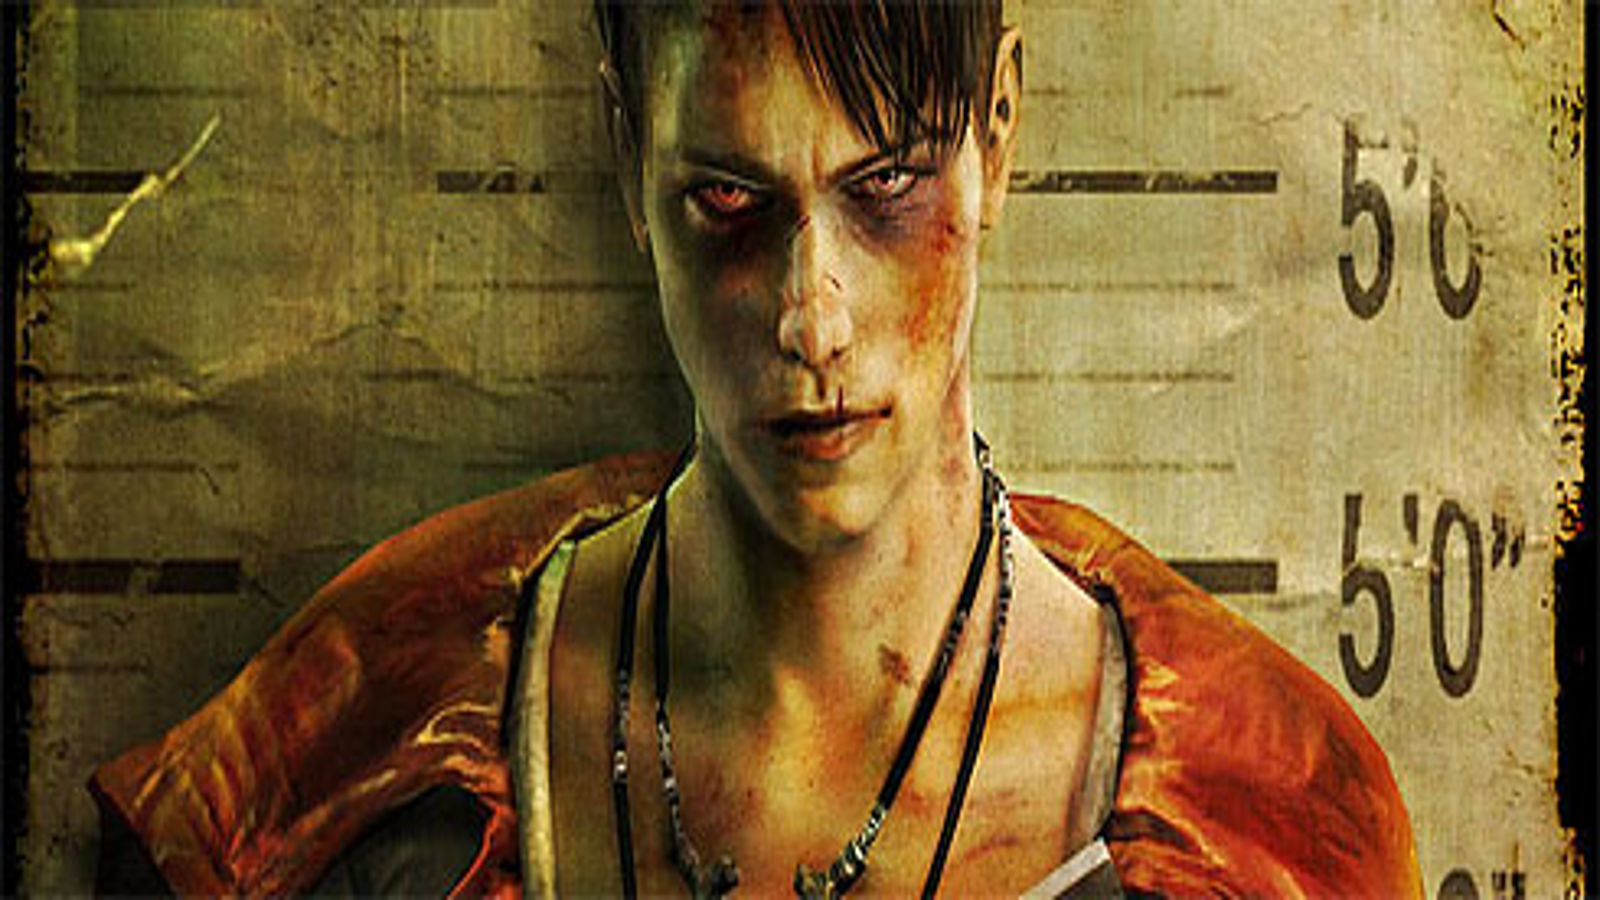 Ninja Theory were asked to 'go crazy' with Dante